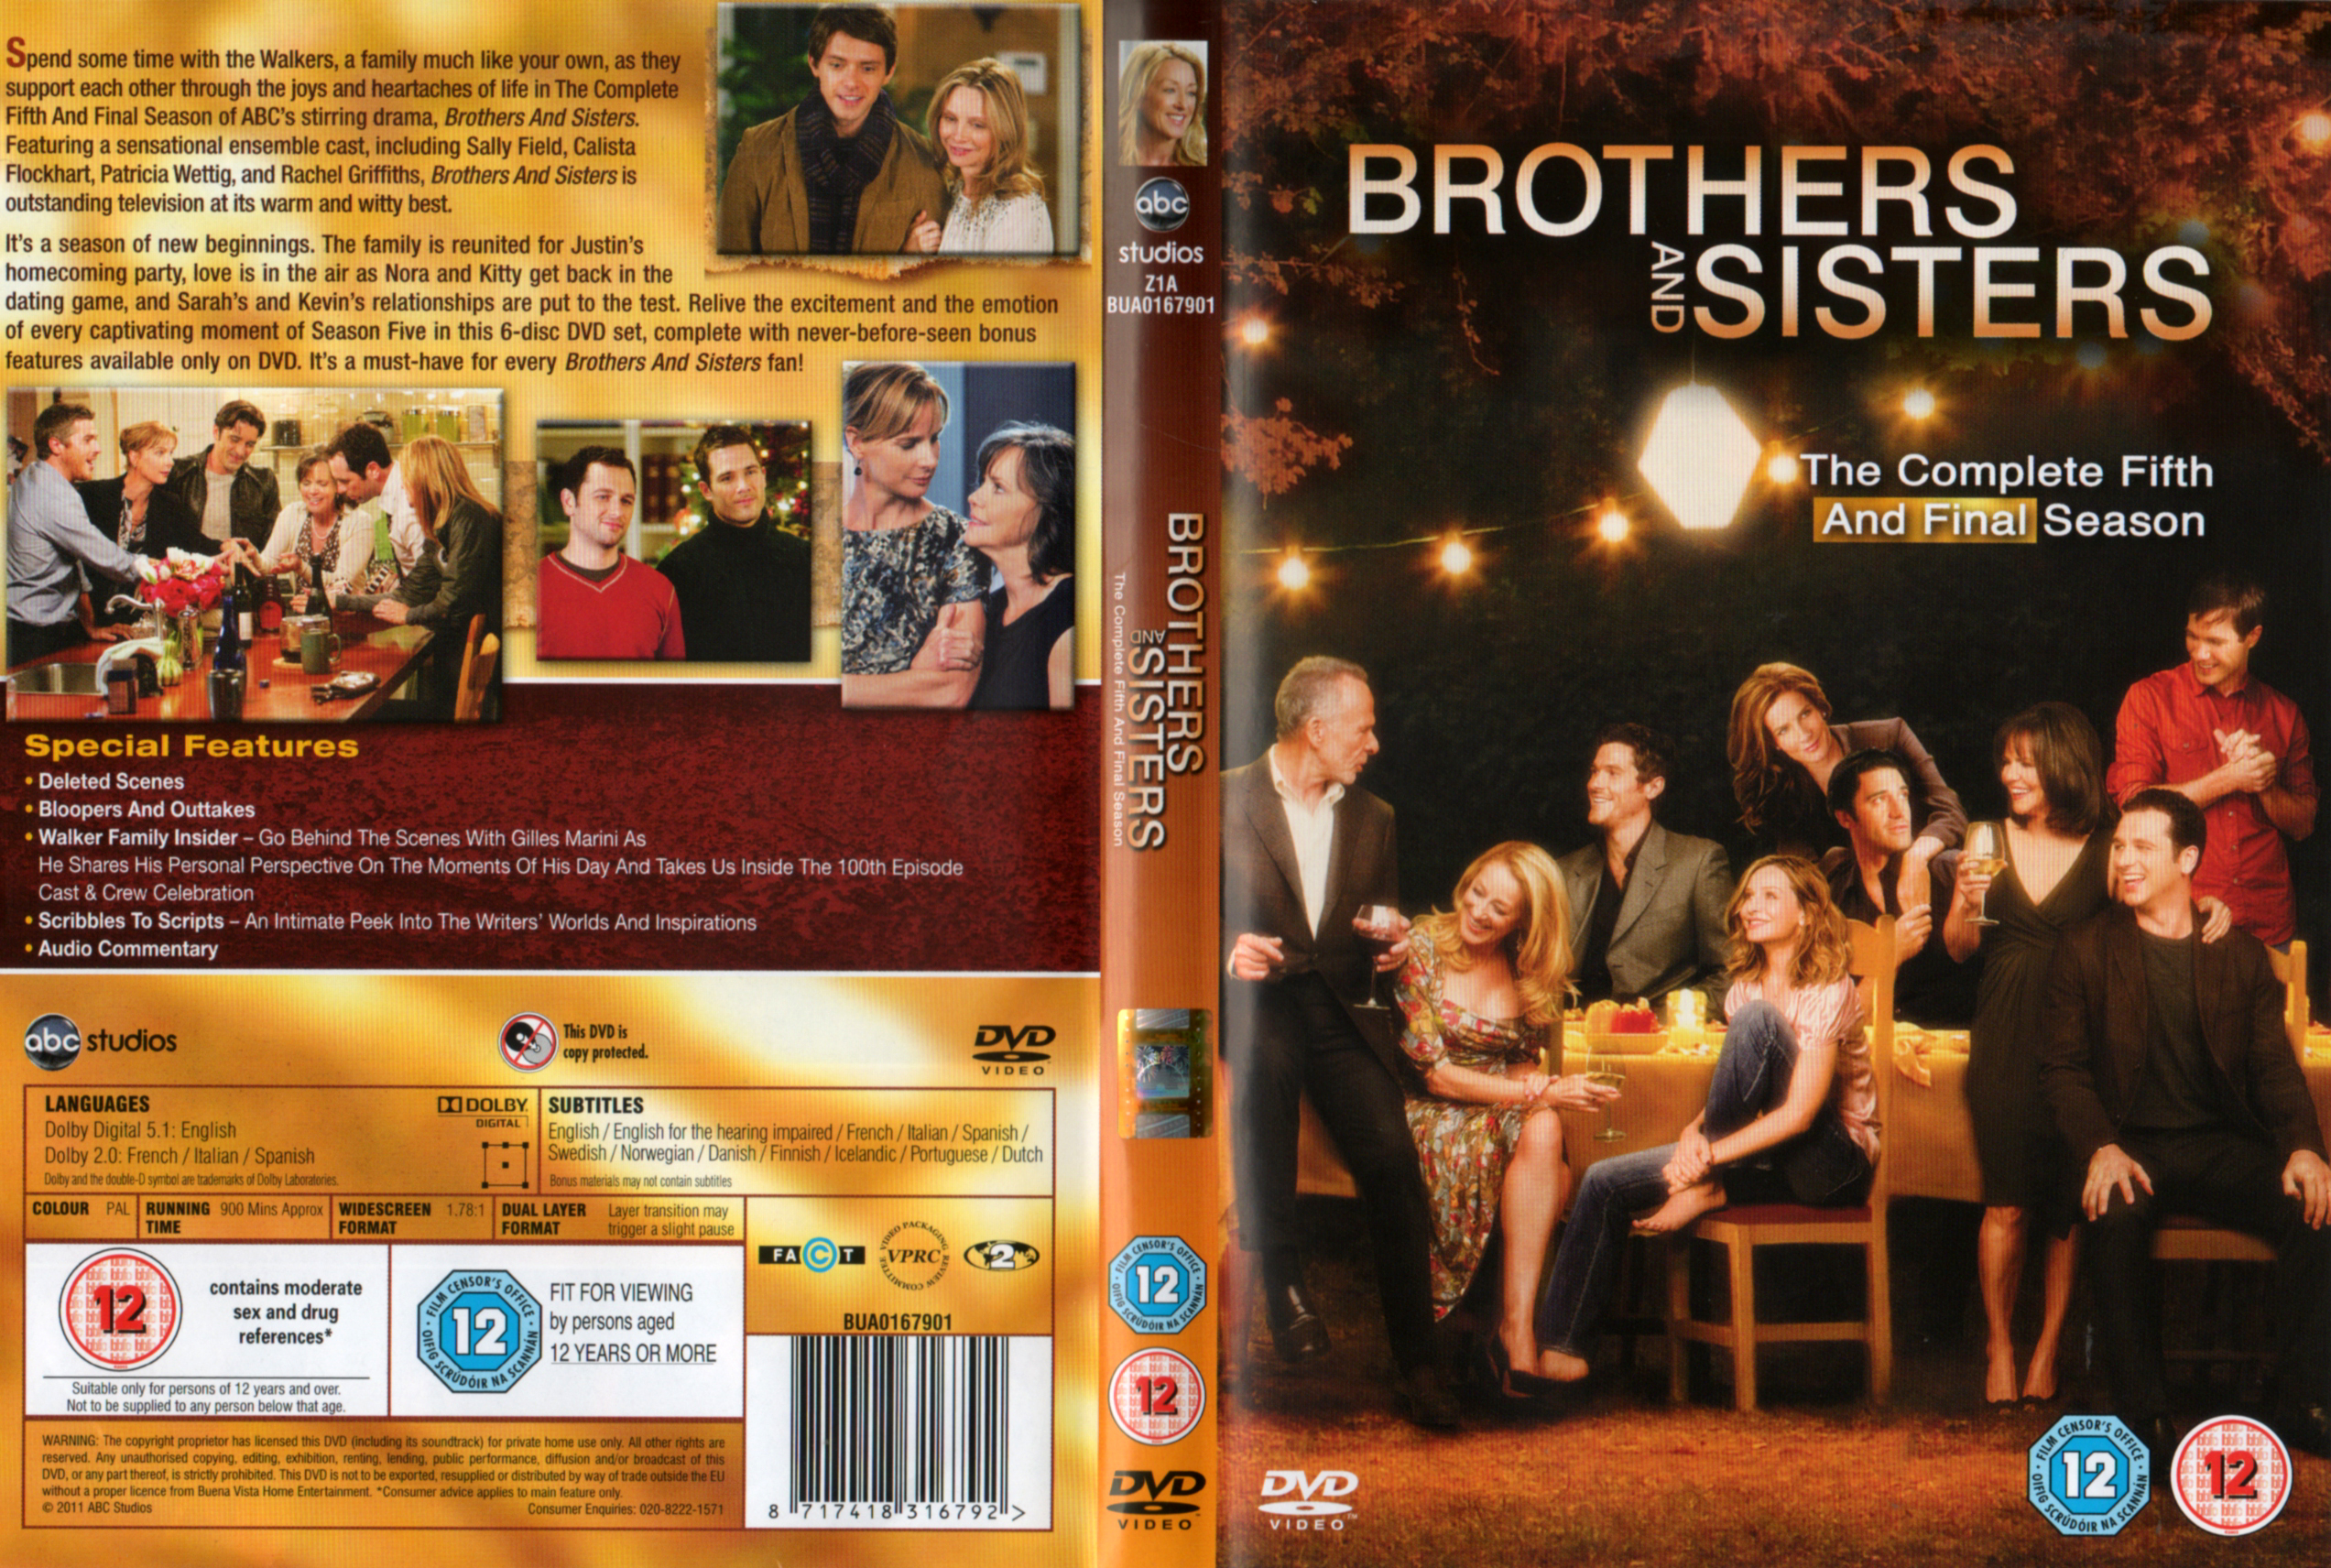 Jaquette DVD Brothers and Sisters Saison 5 Zone 1